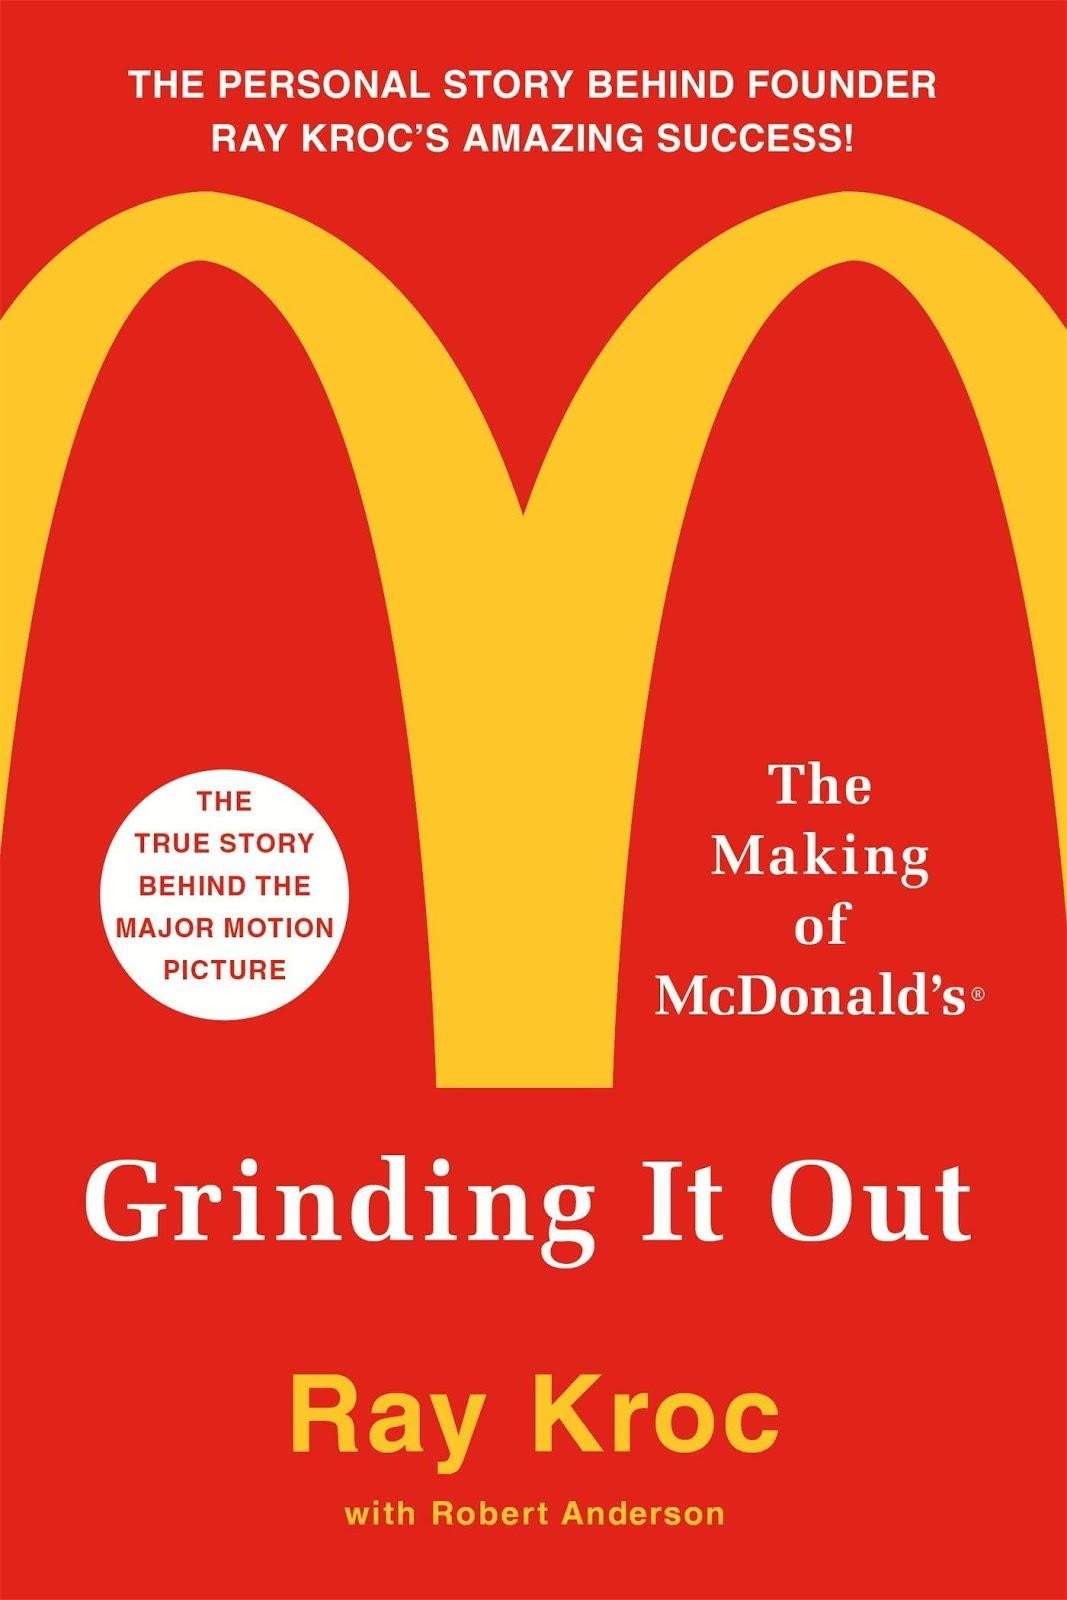 Book 'Grinding it Out'